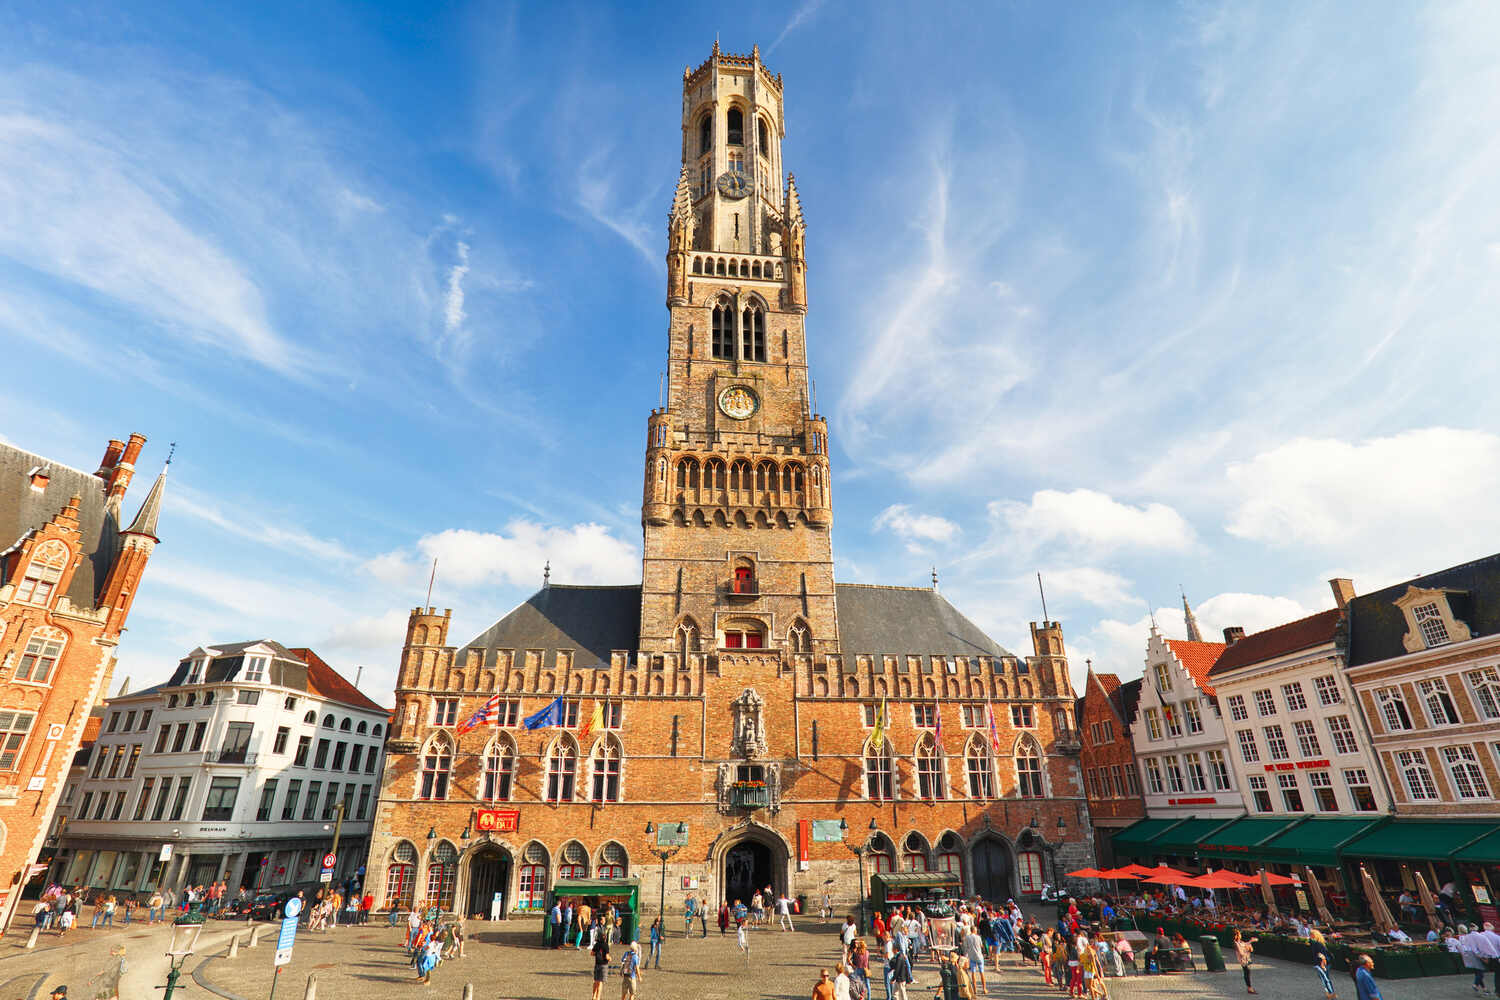 Belfry tower in Bruges with a square at the base